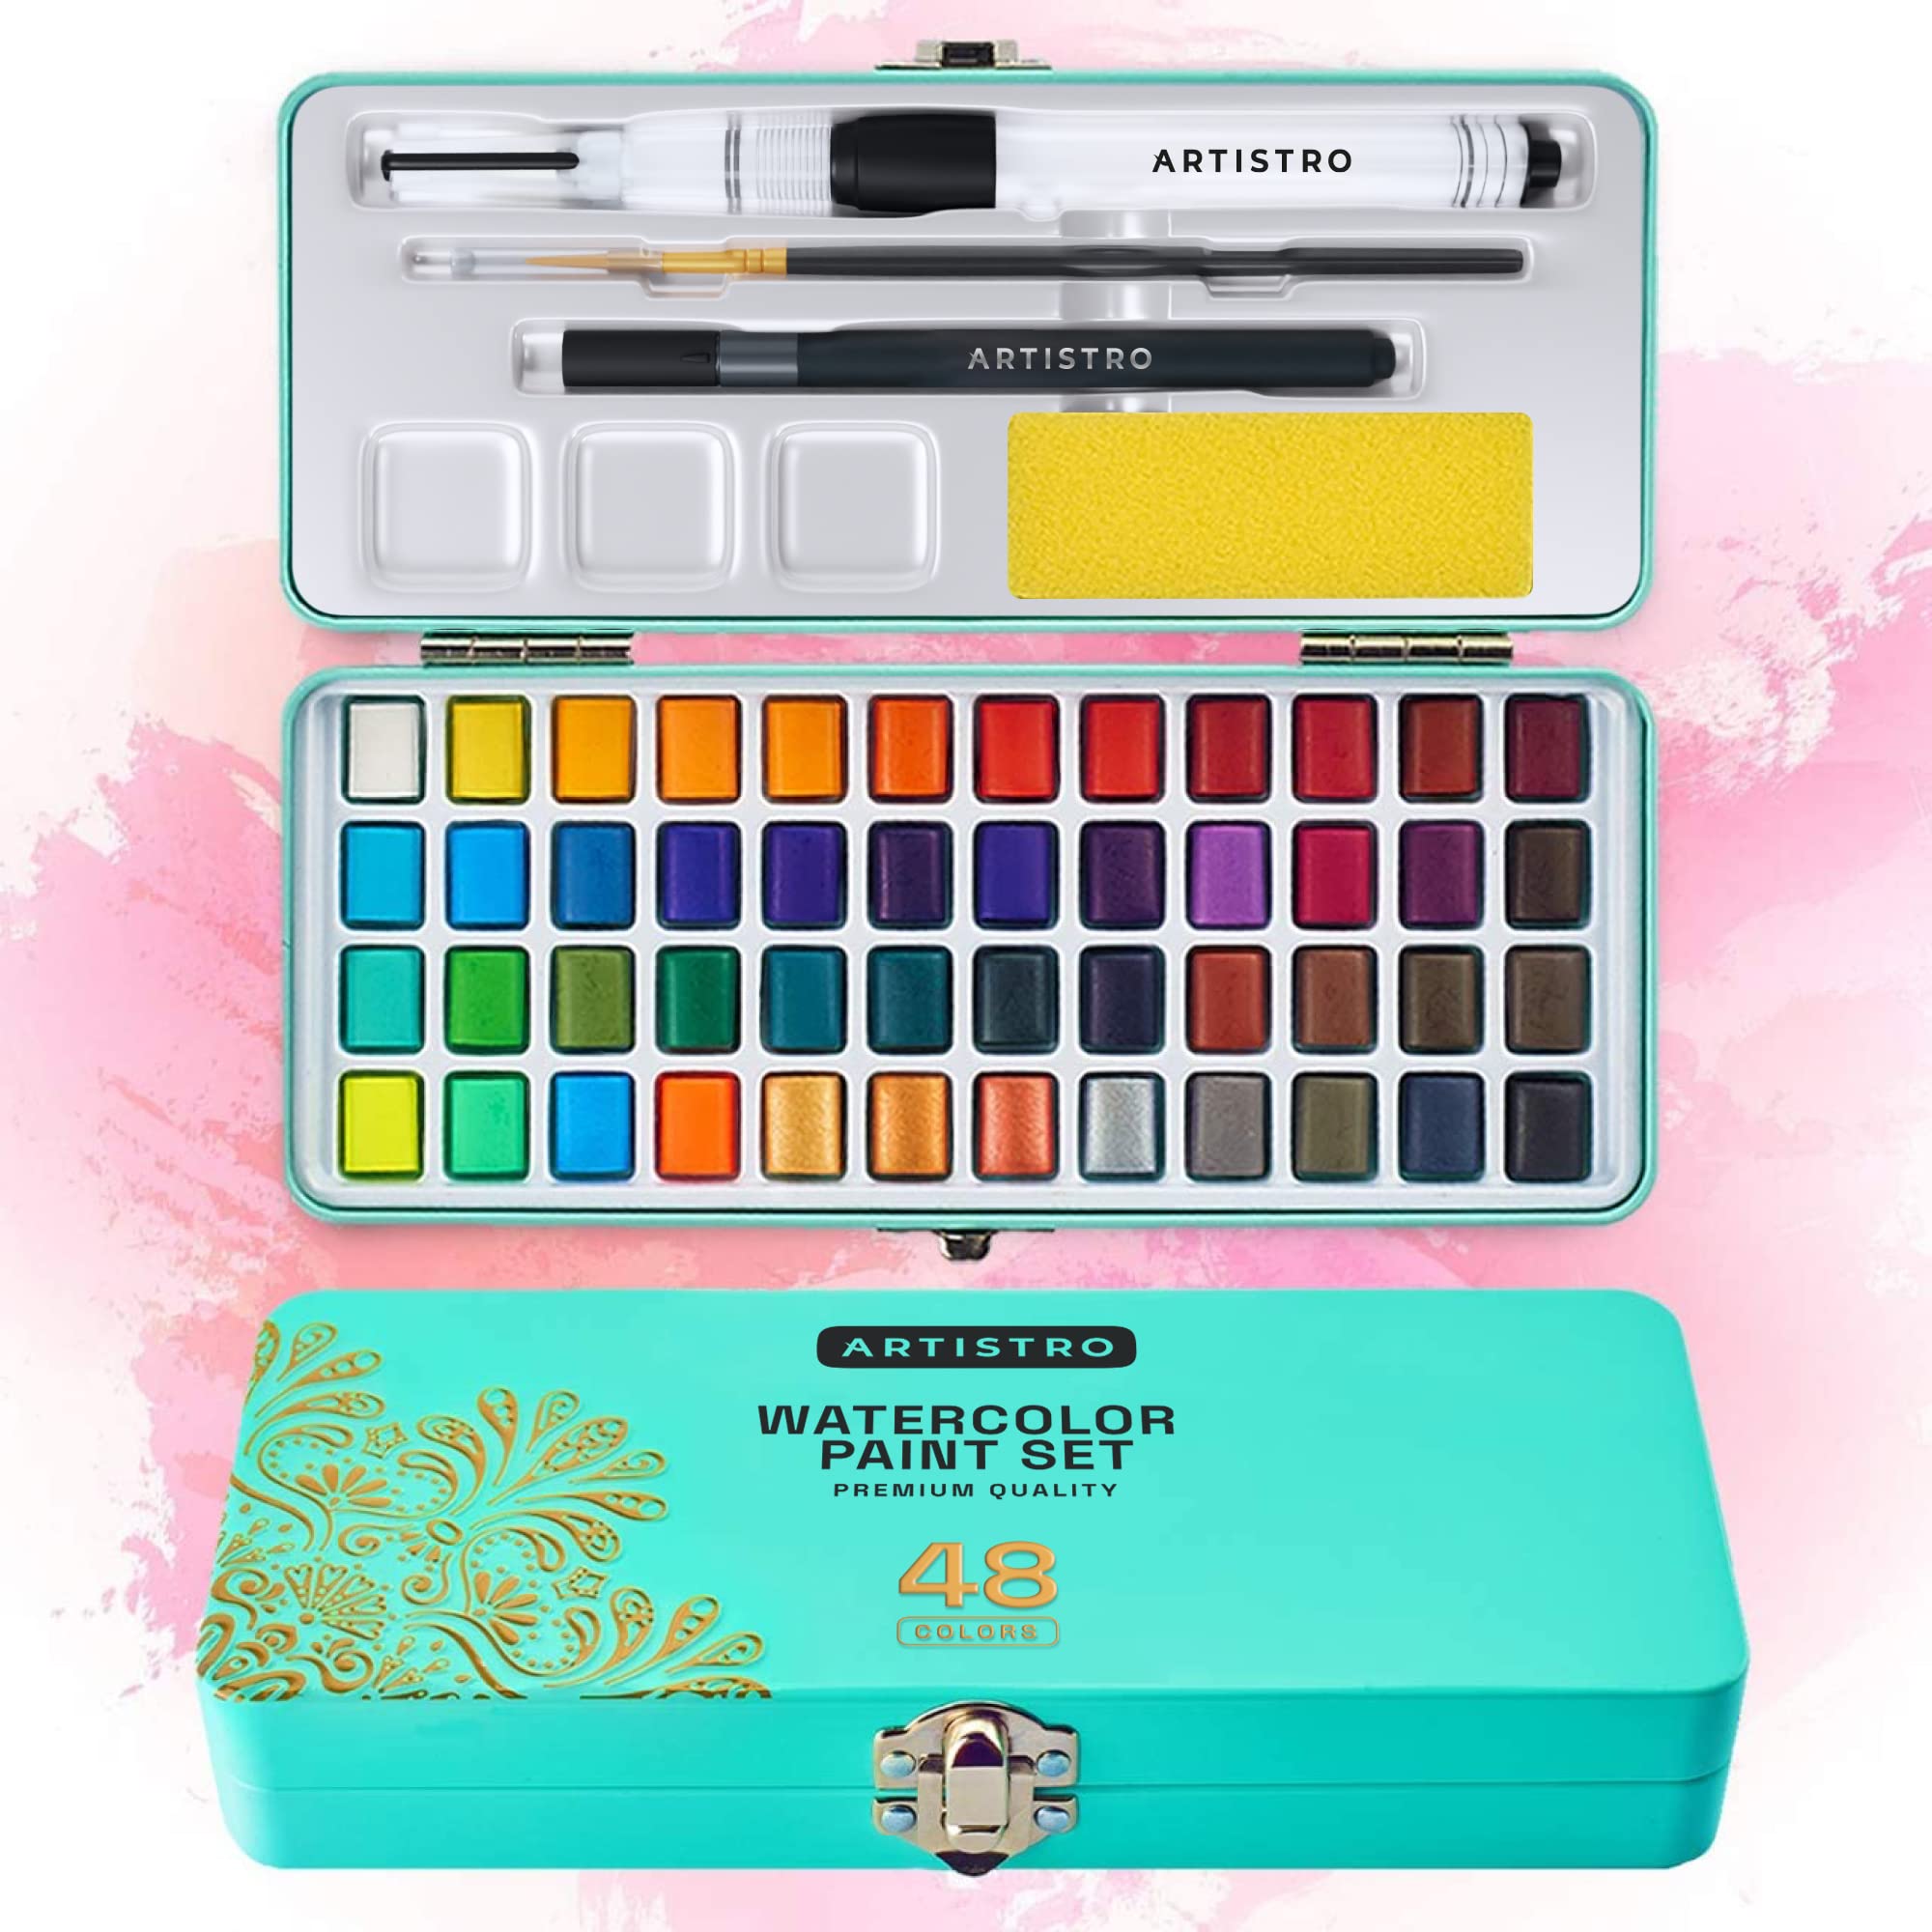  ARTISTRO Watercolor Paint Set, 100 Vivid Colors in Portable  Box, Including Metallic, Fluorescent, Pastel Colors. Perfect Travel Watercolor  Set for Artsits, Amateur, Hobbyists and Painting Lovers : Toys & Games